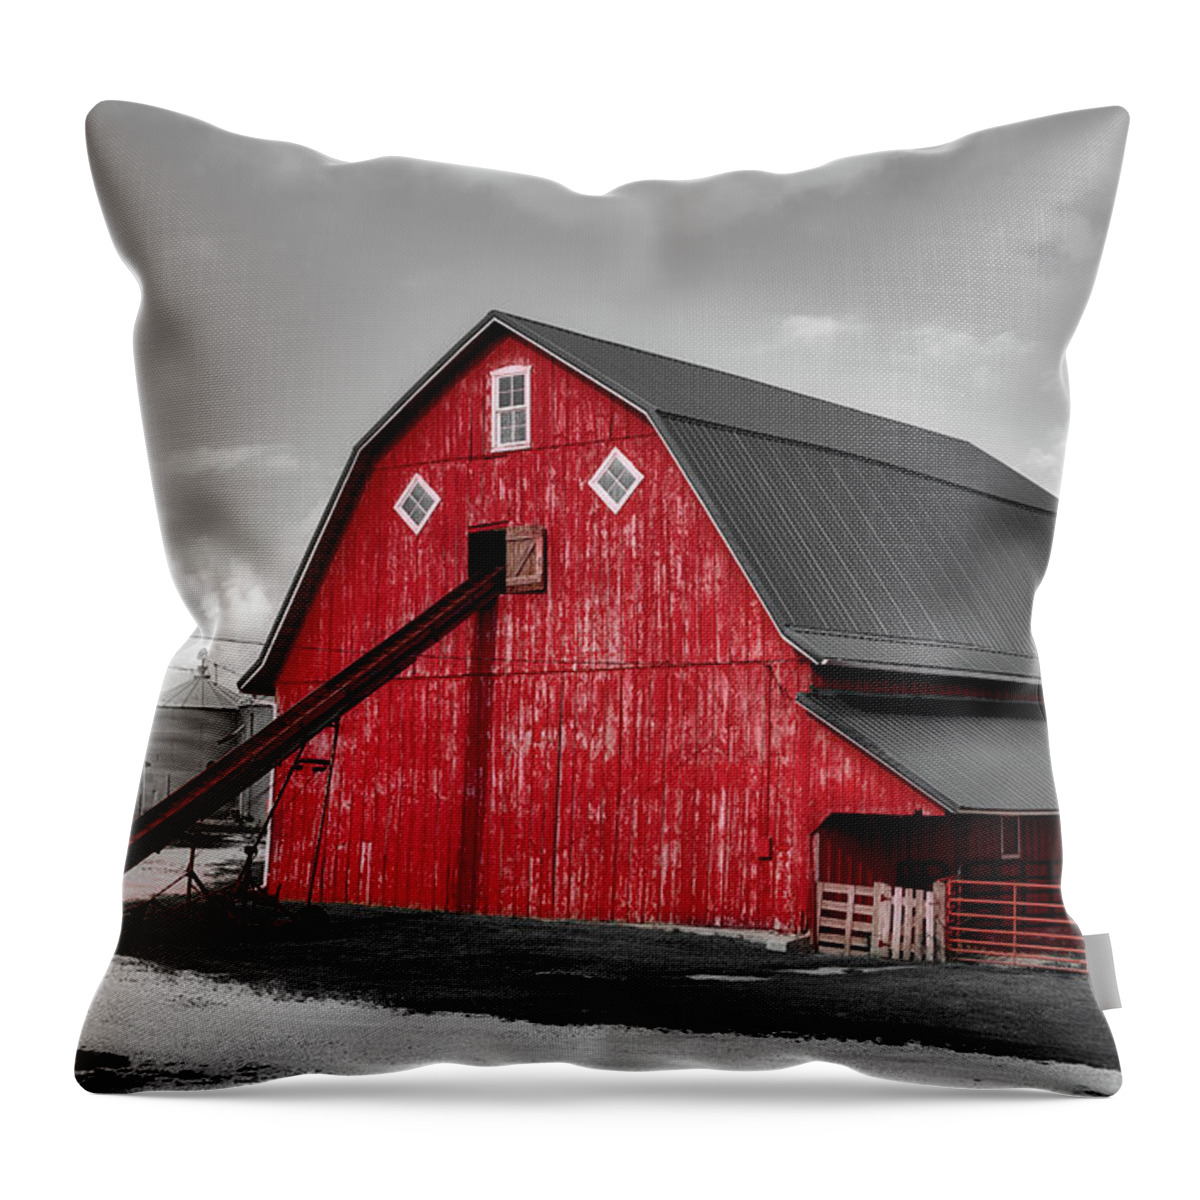 Iowa Throw Pillow featuring the photograph On The Farm In Iowa by Mountain Dreams